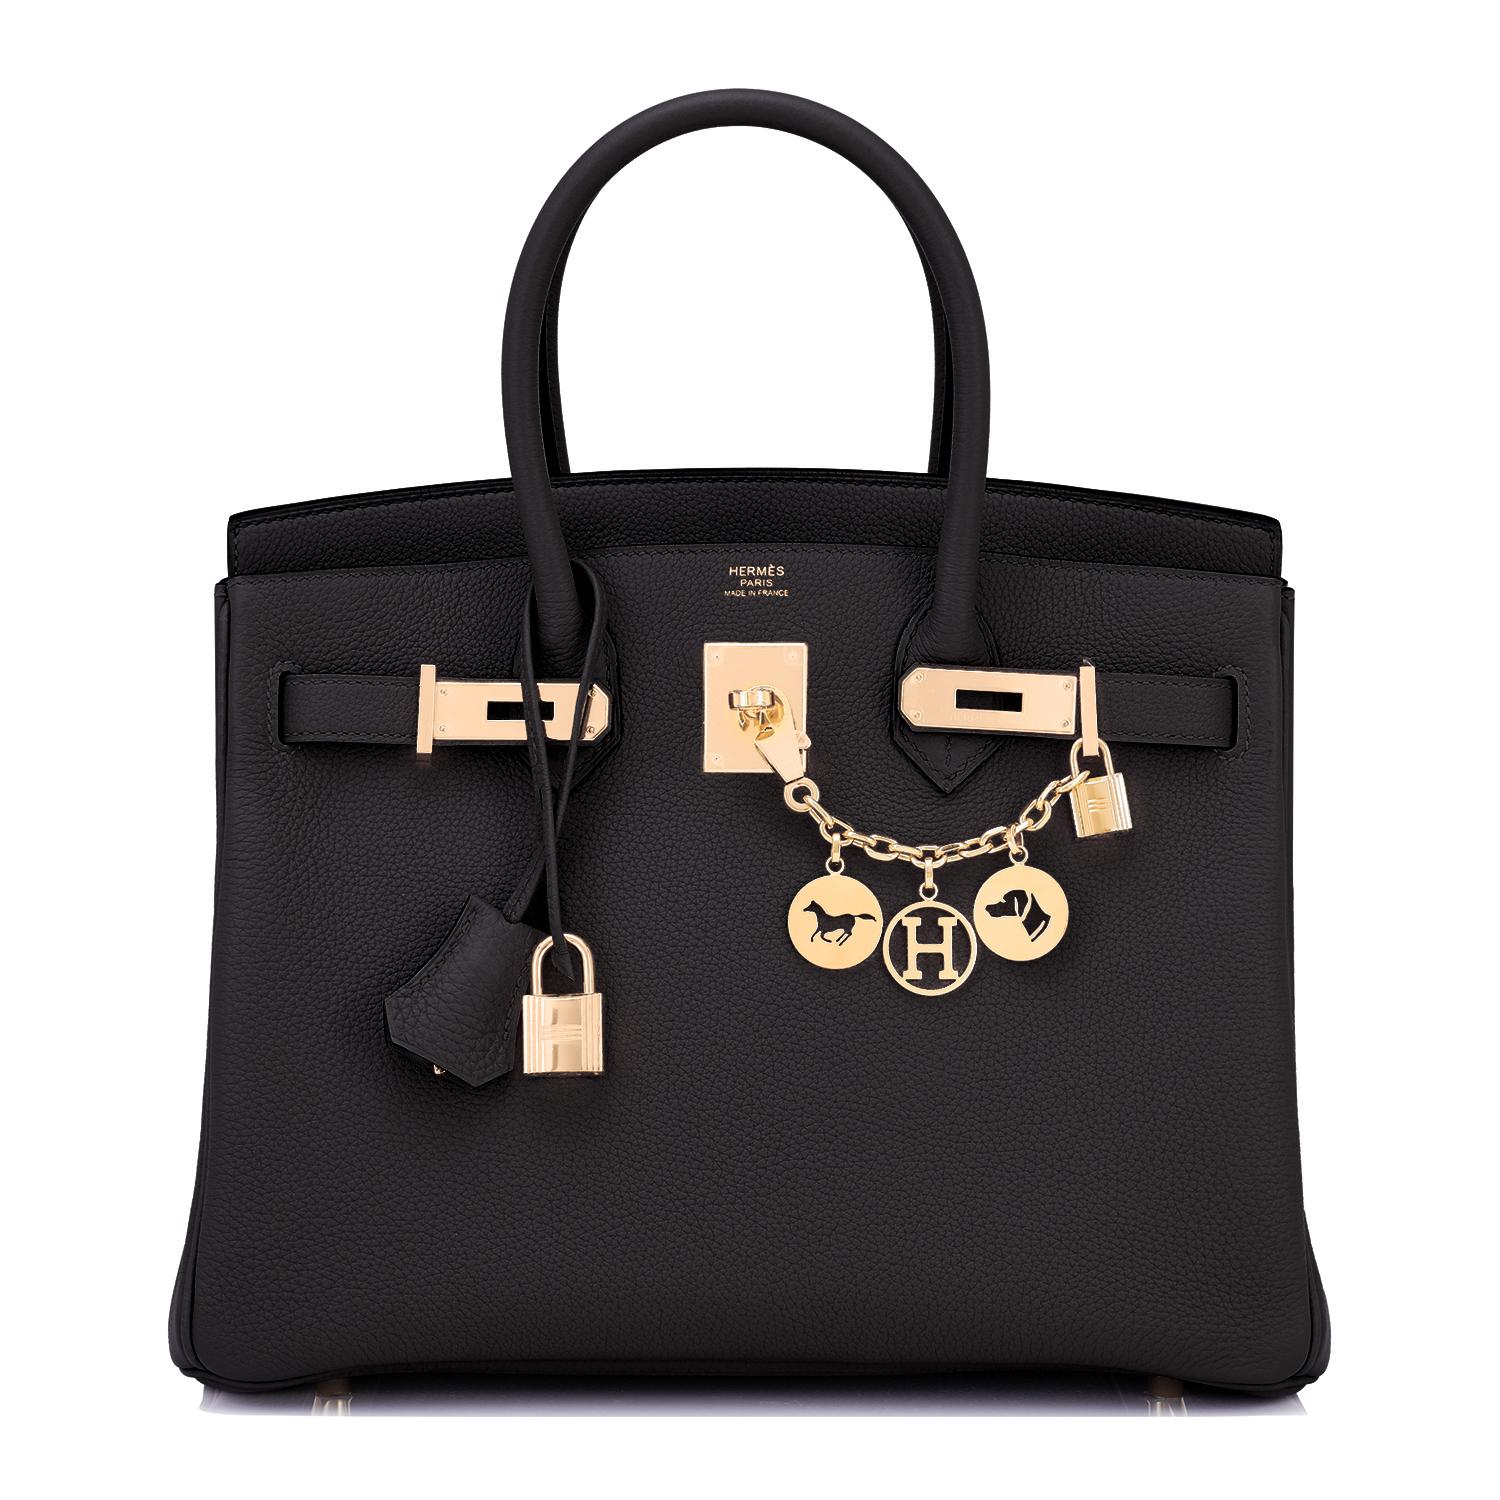 Hermes Birkin 30cm Black Togo Rose Gold Hardware Bag U Stamp, 2022
Don't miss it- Black with Rose Gold is soooo pretty!
Just purchased from store; bag bears new 2022interior U stamp! 
Brand New in Box. Store Fresh. Pristine Condition (with plastic